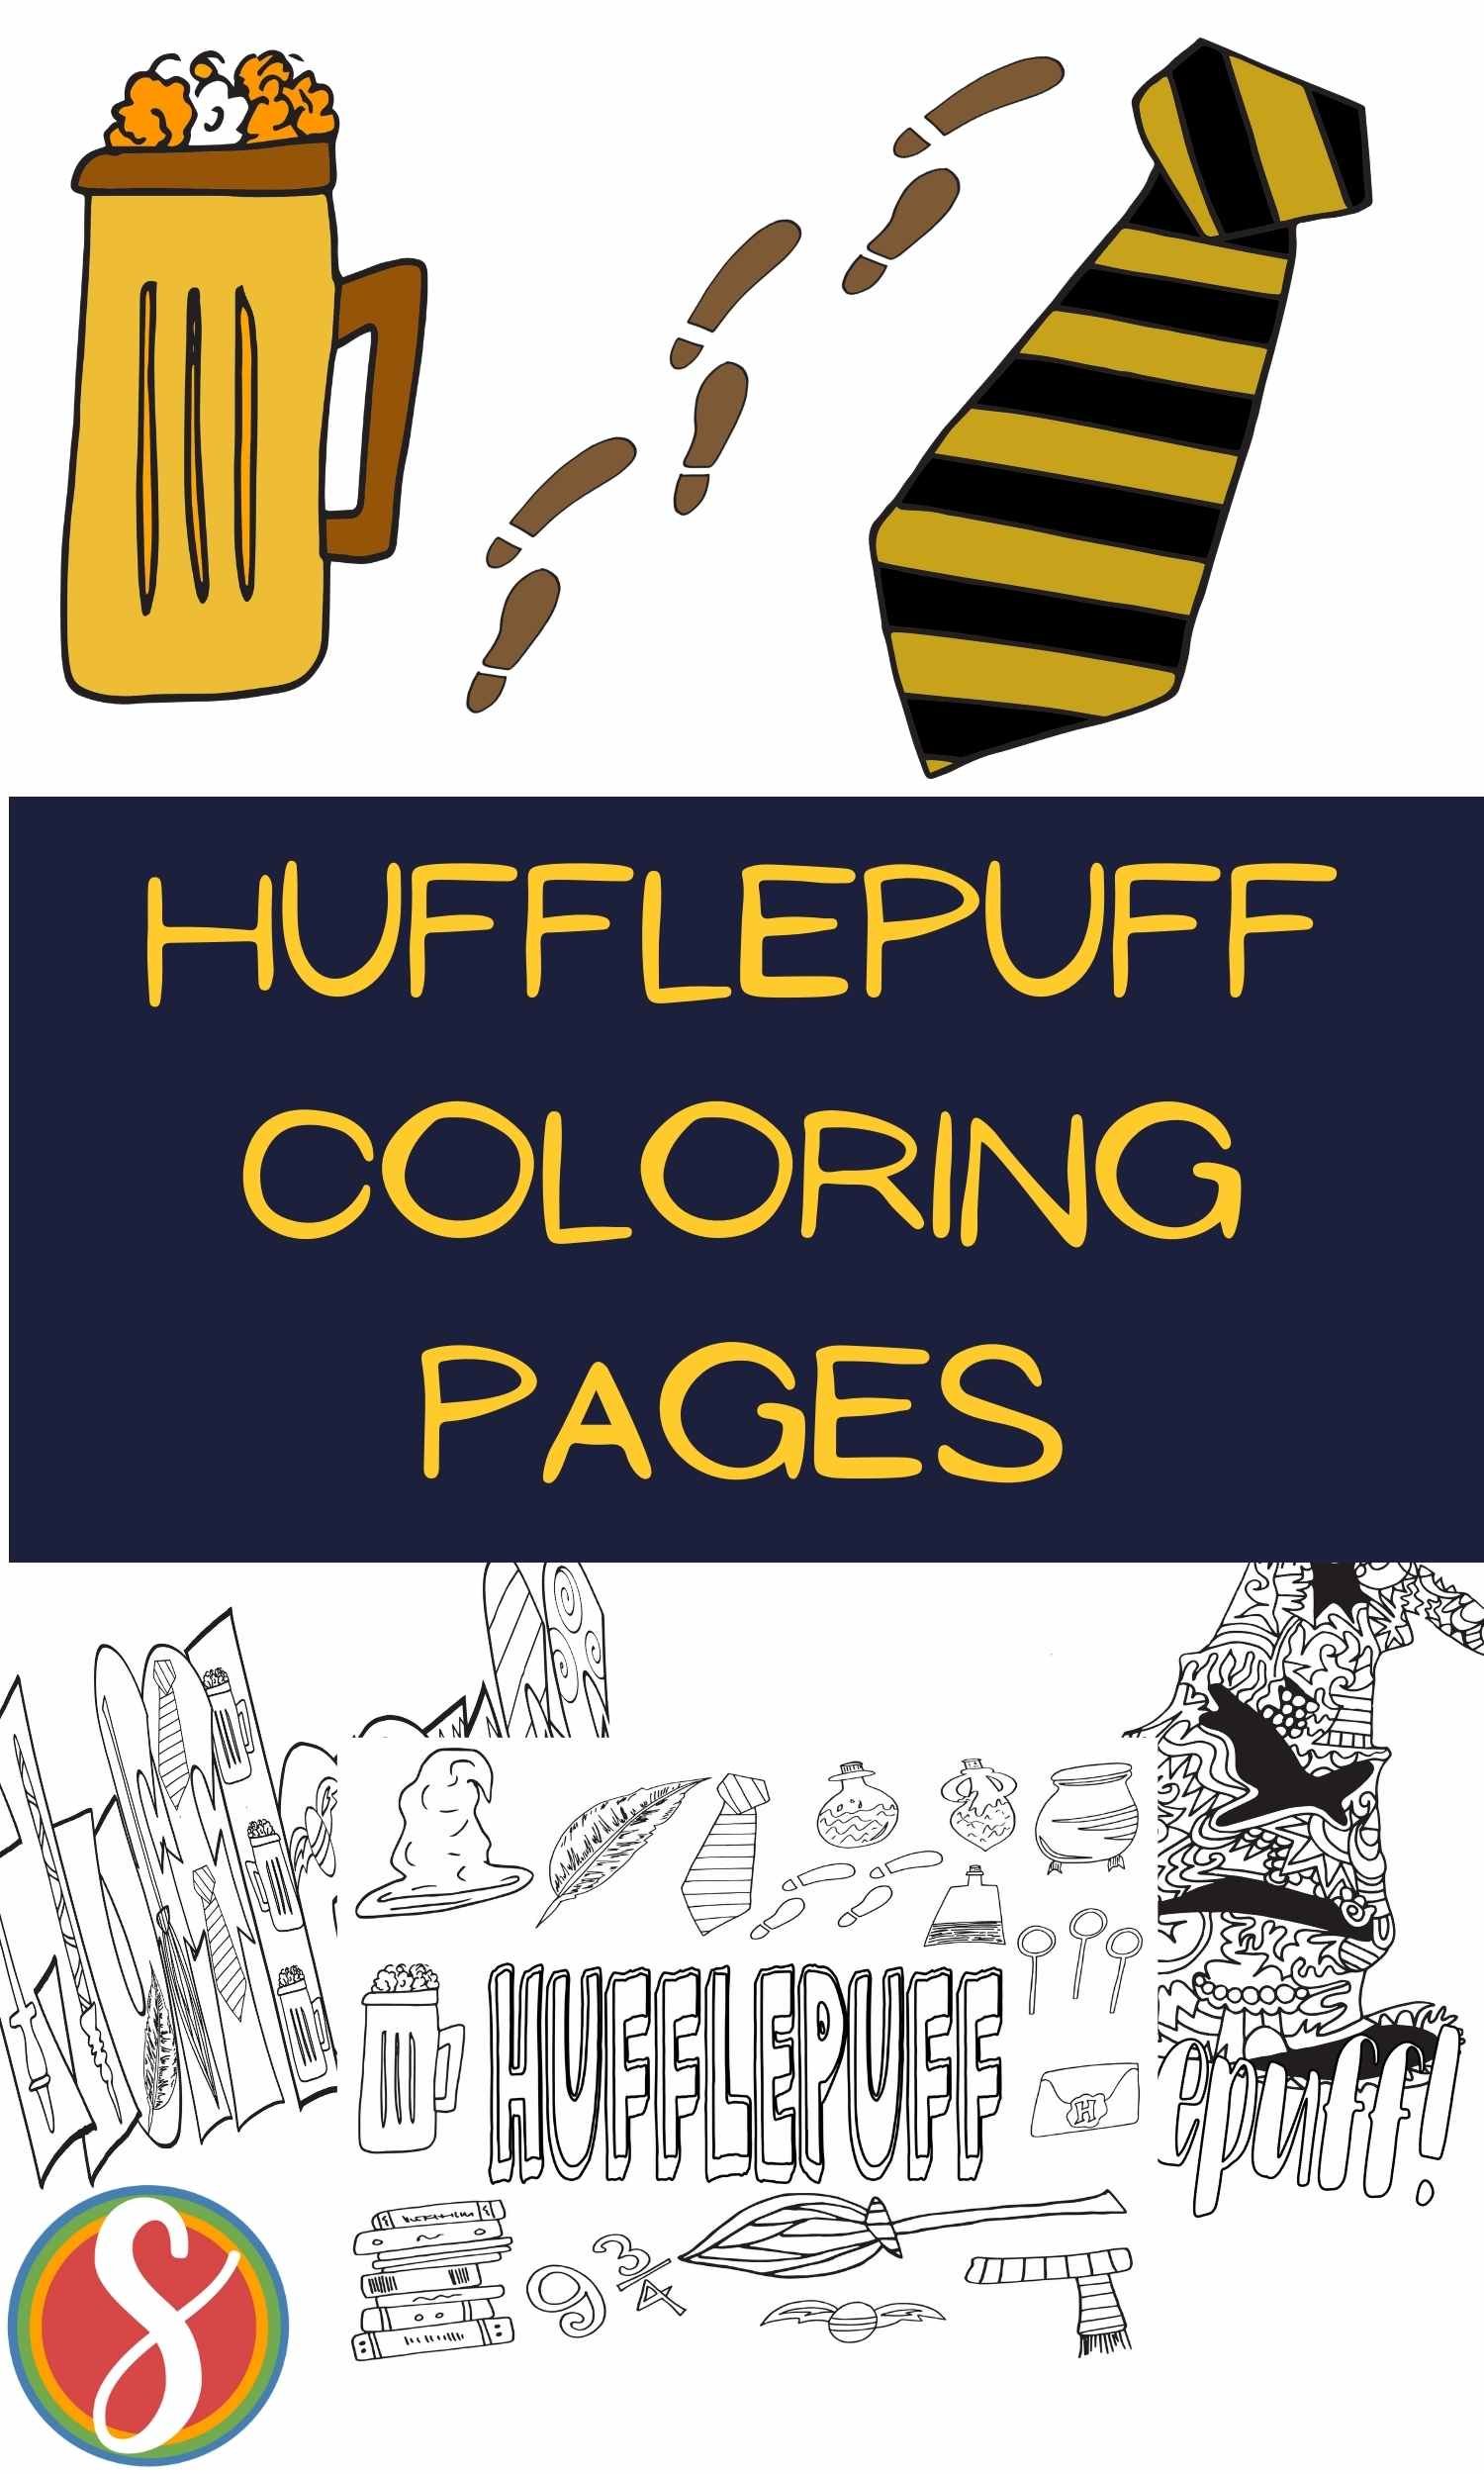 Free hufflepuff coloring pages â stevie doodles